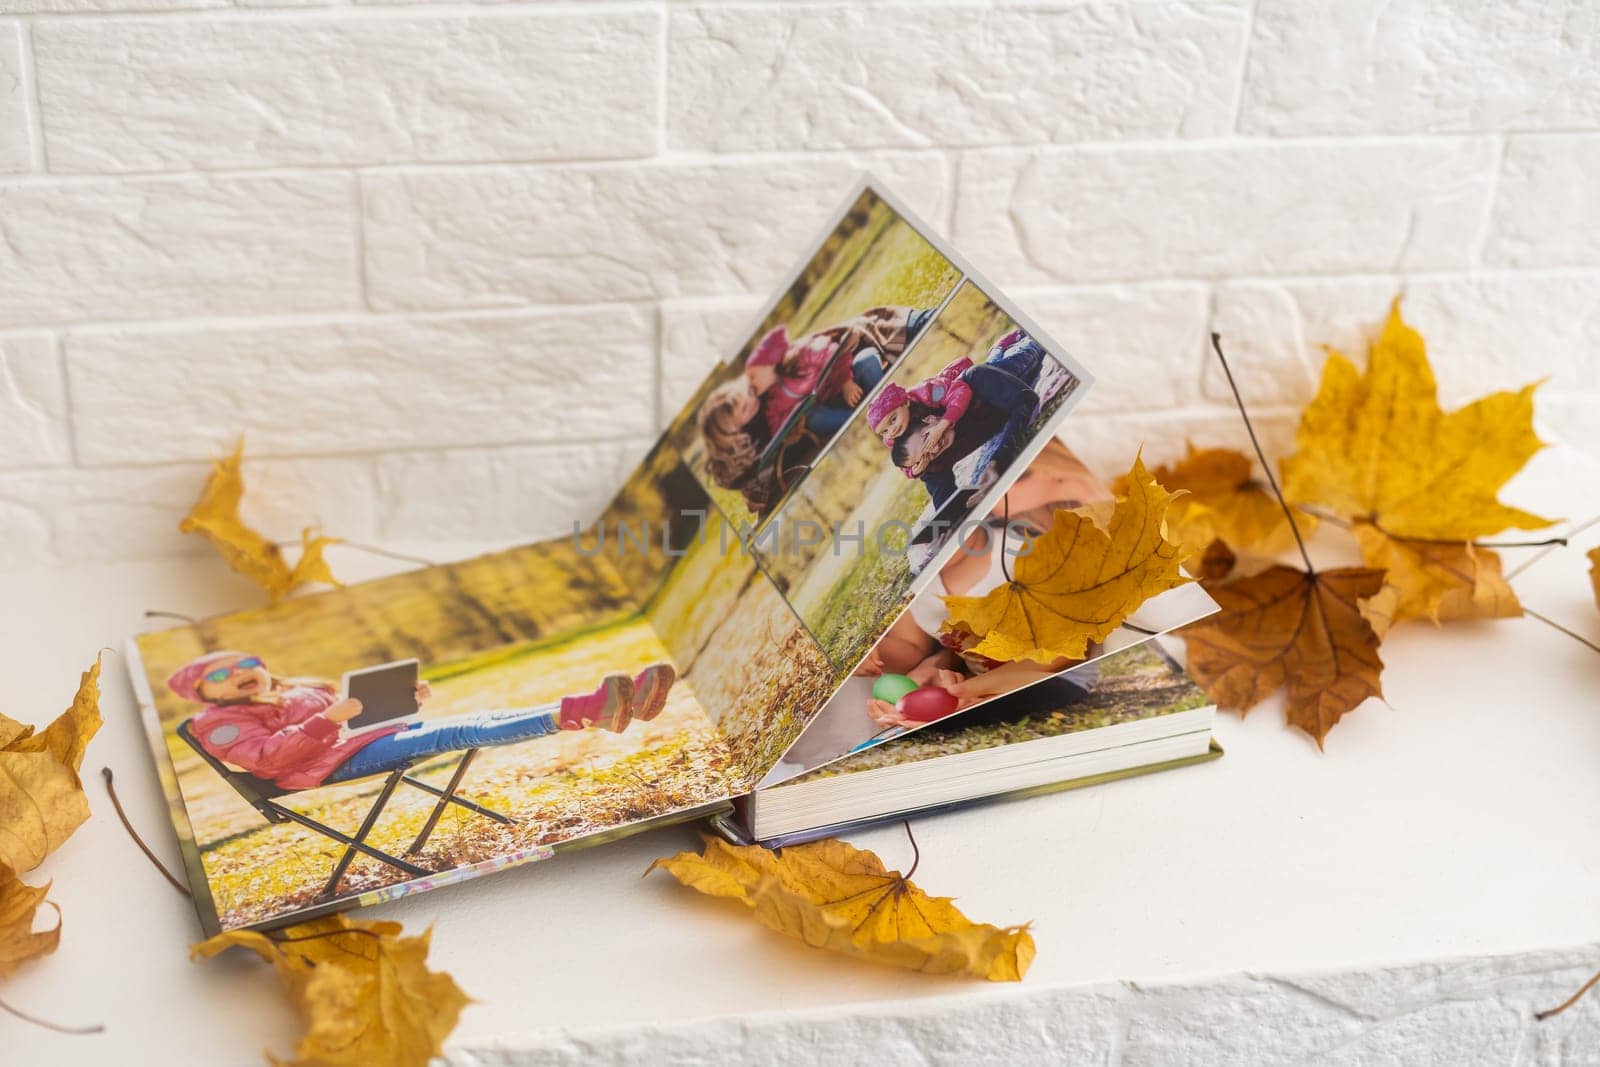 dry autumn leaves and a photo album by Andelov13